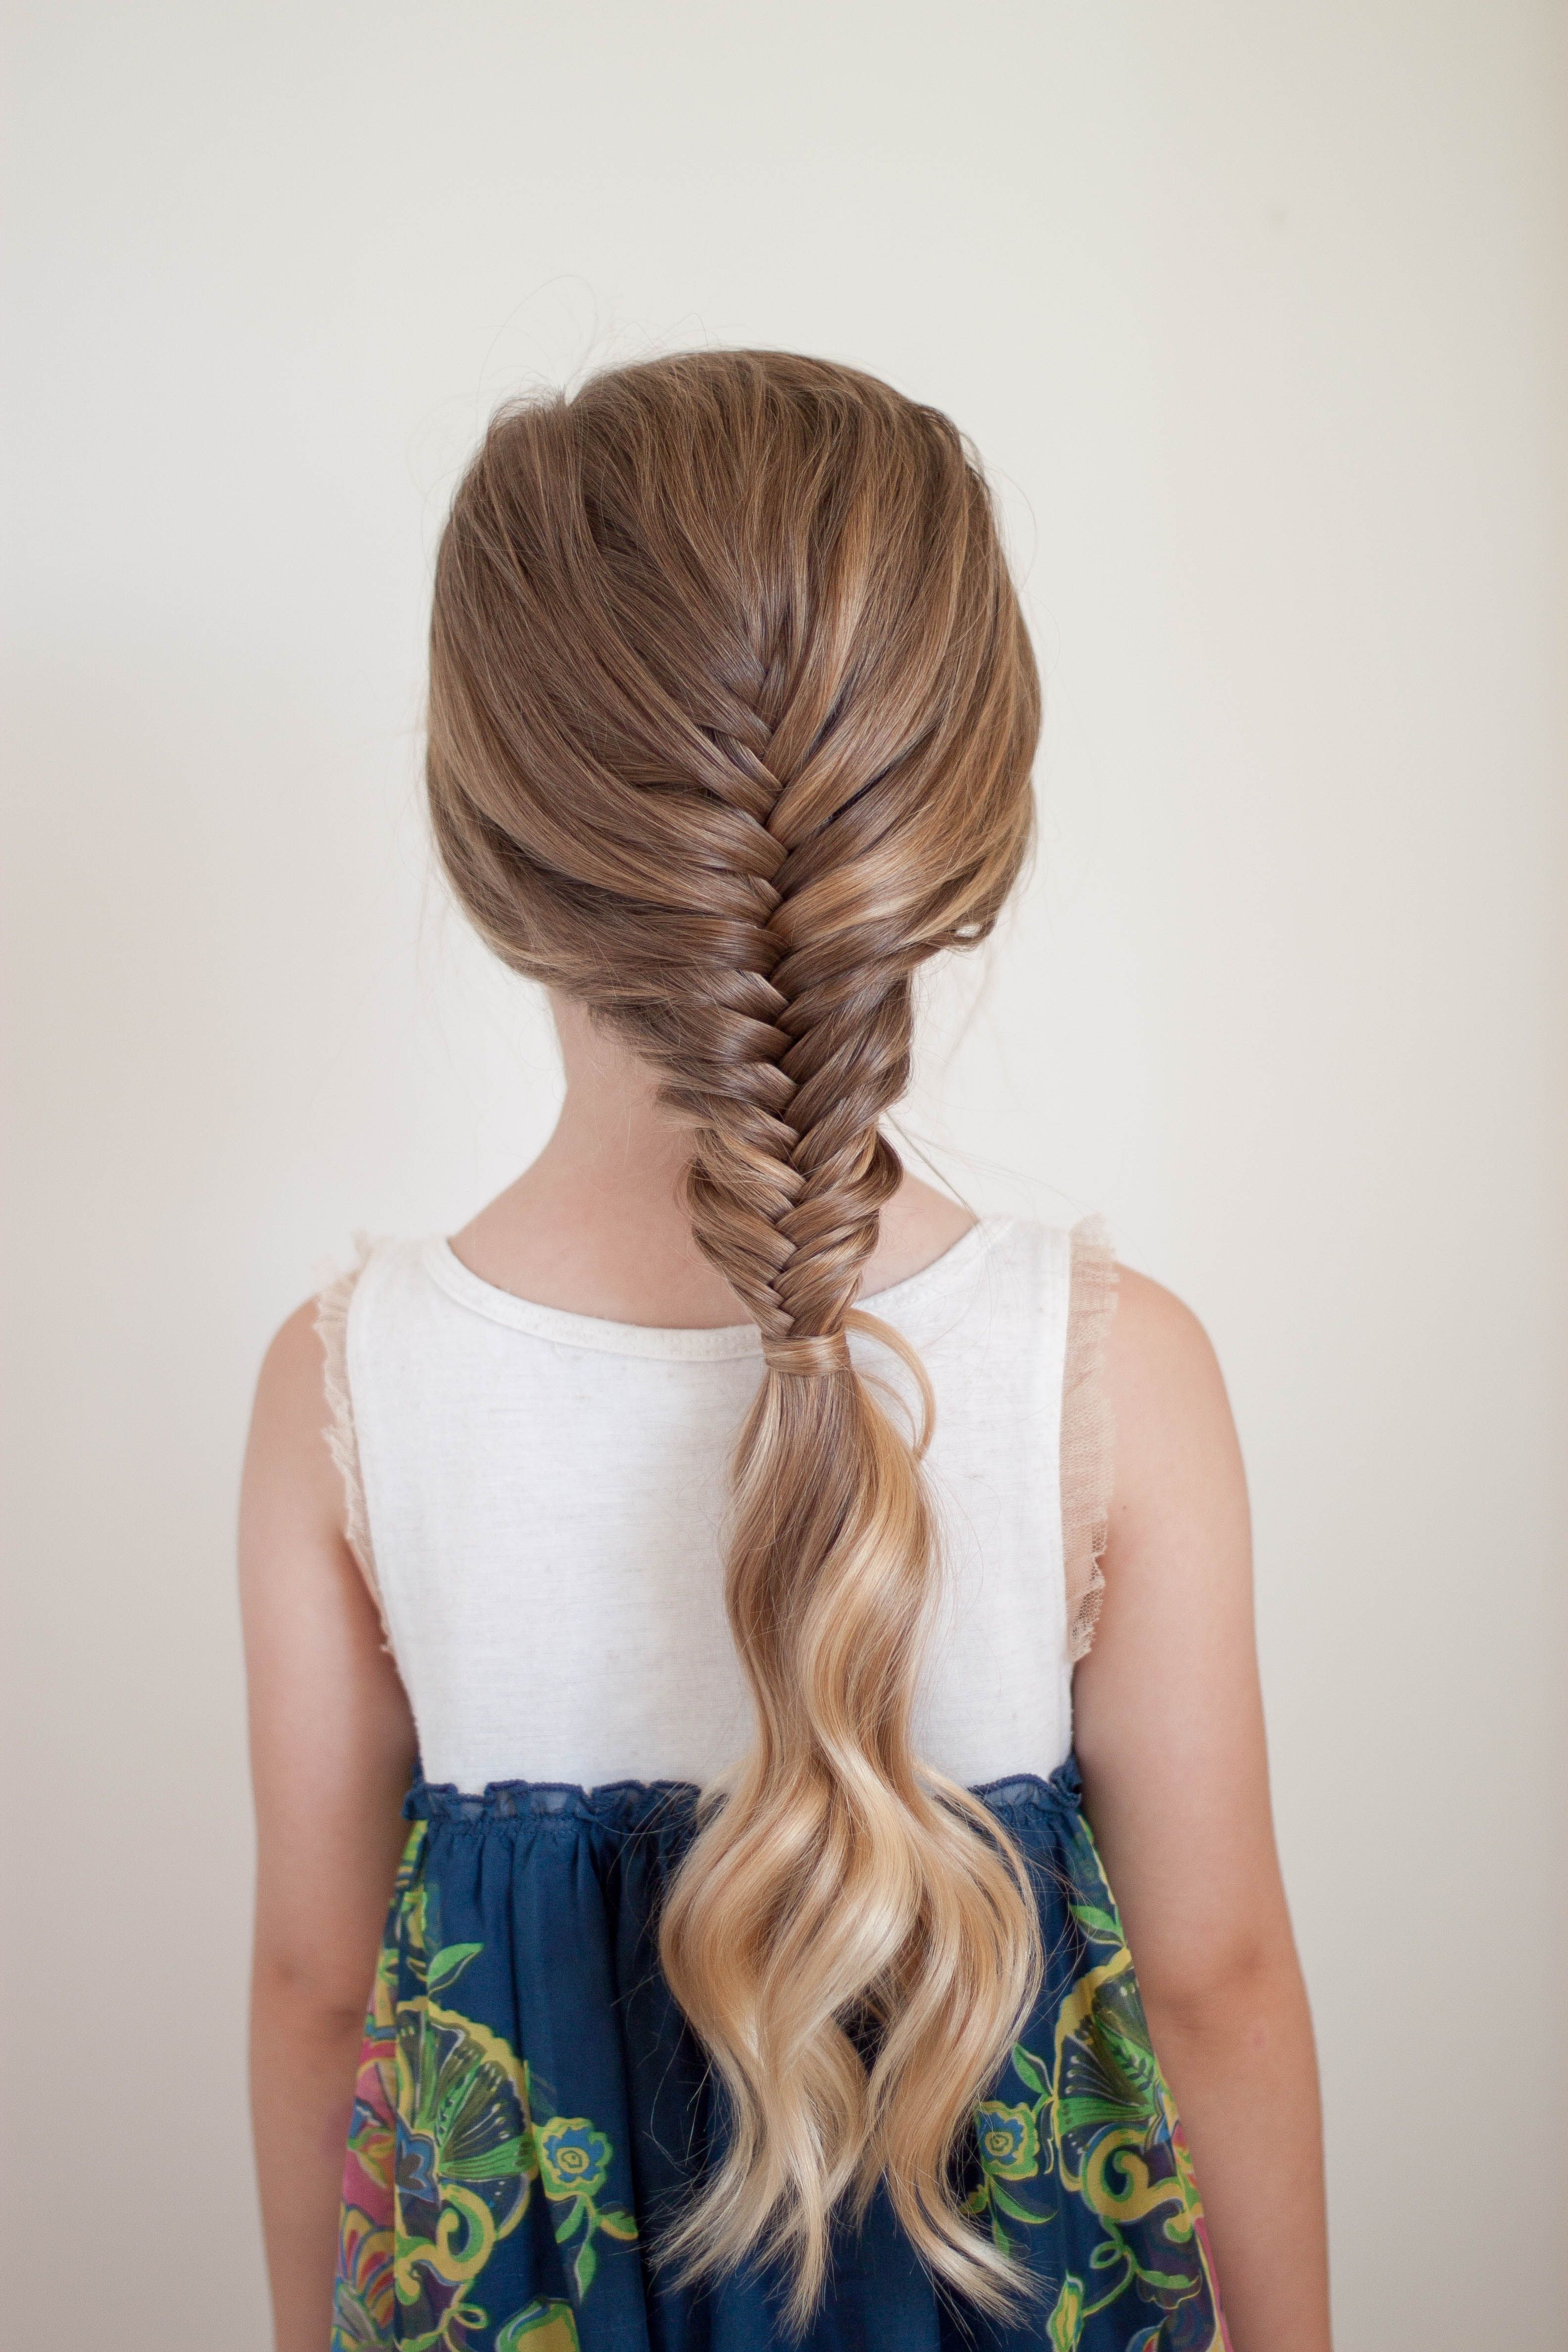 Fantastic Fishtail Braid Styles – Jcomm Services With Most Up To Date Macrame Braid Hairstyles (View 17 of 20)